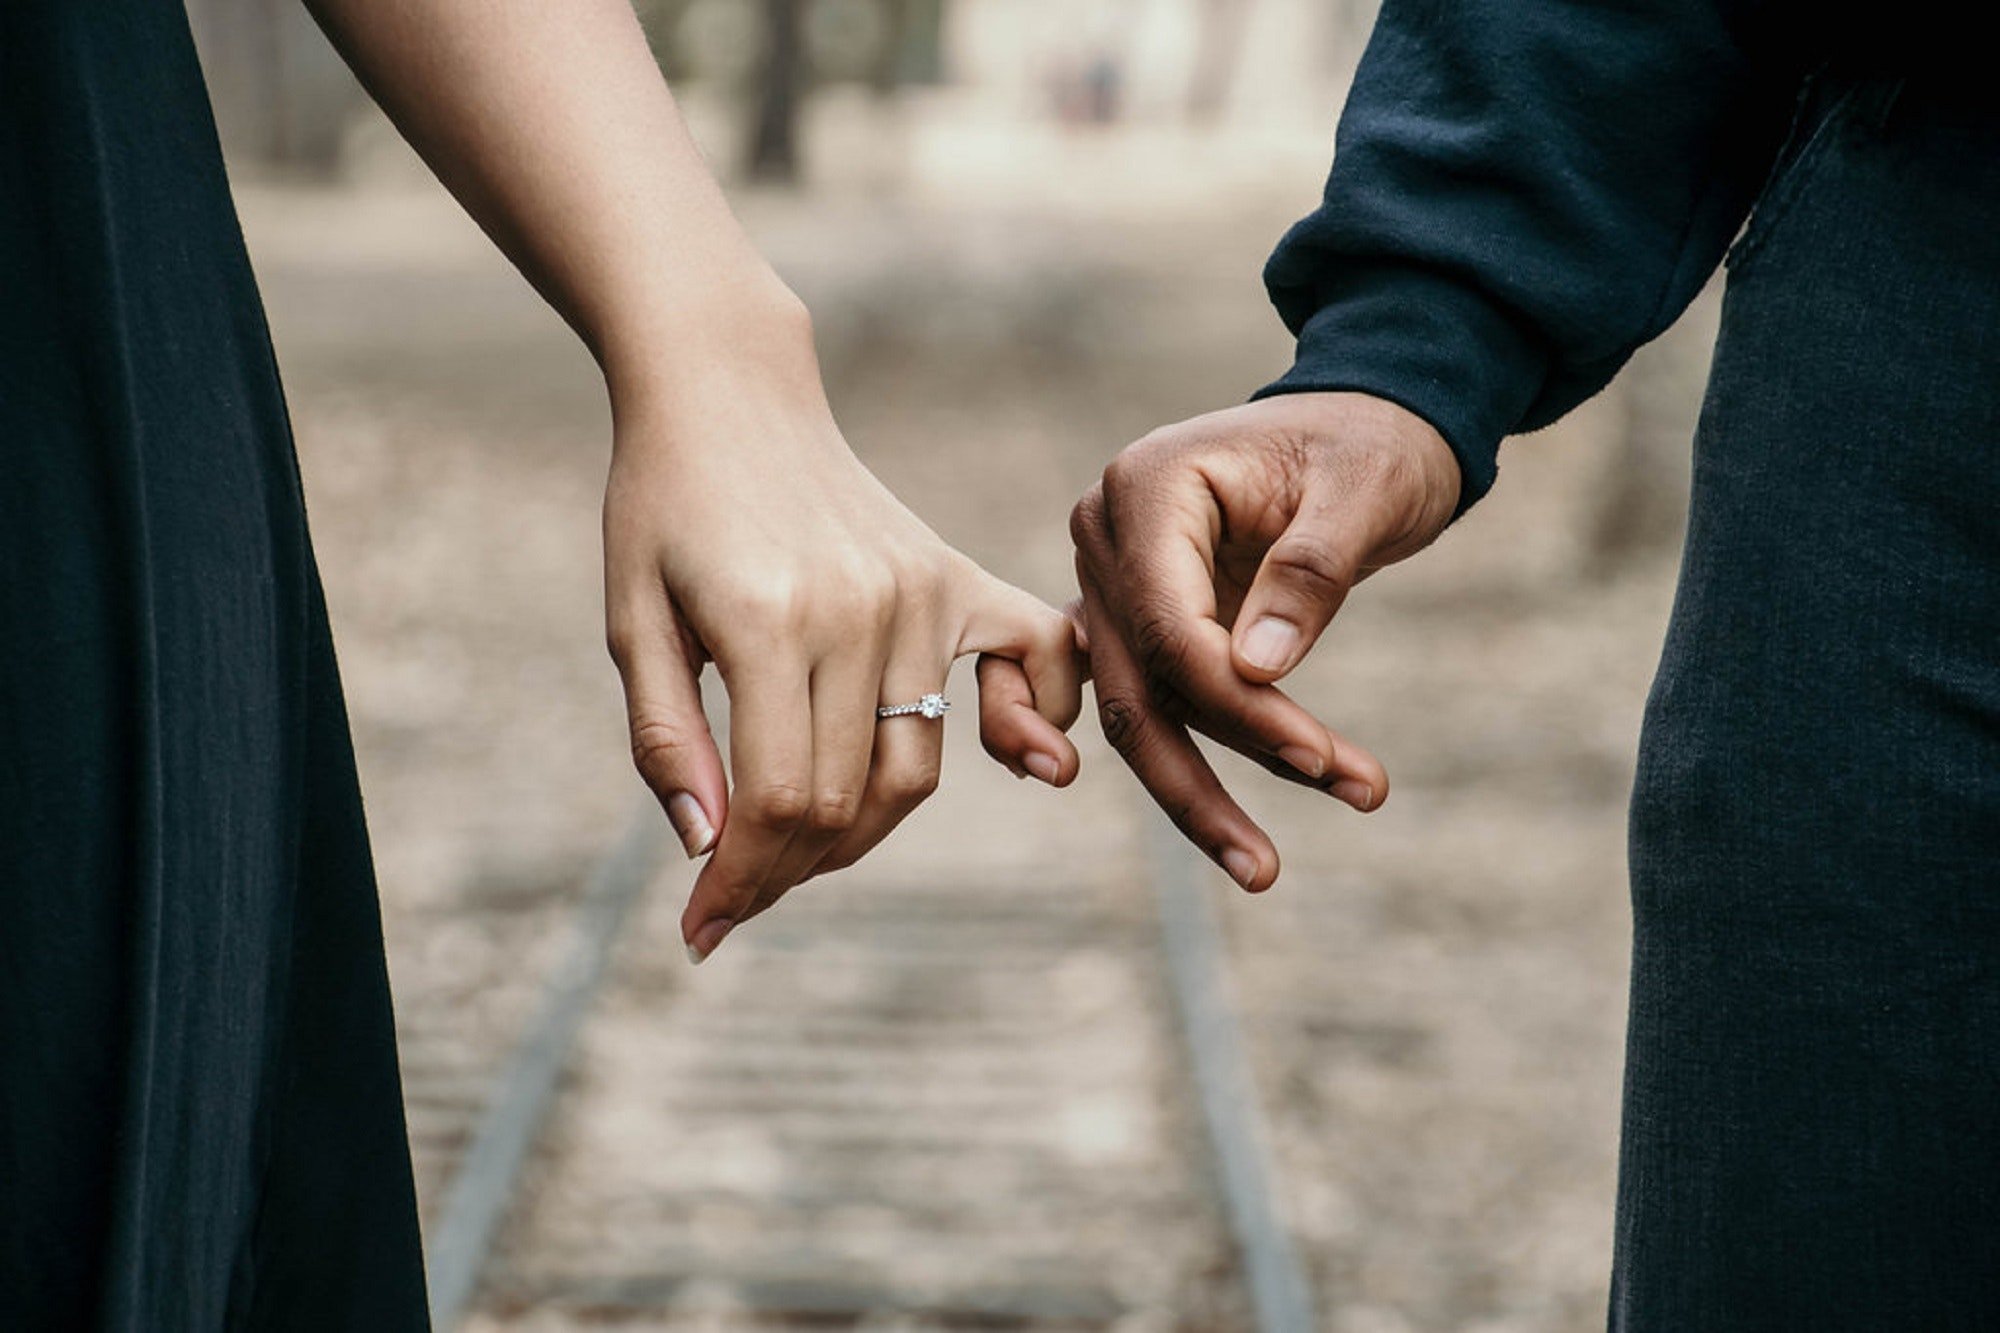 Mia fell in love and got engaged to a wealthy man. | Source: Pexels